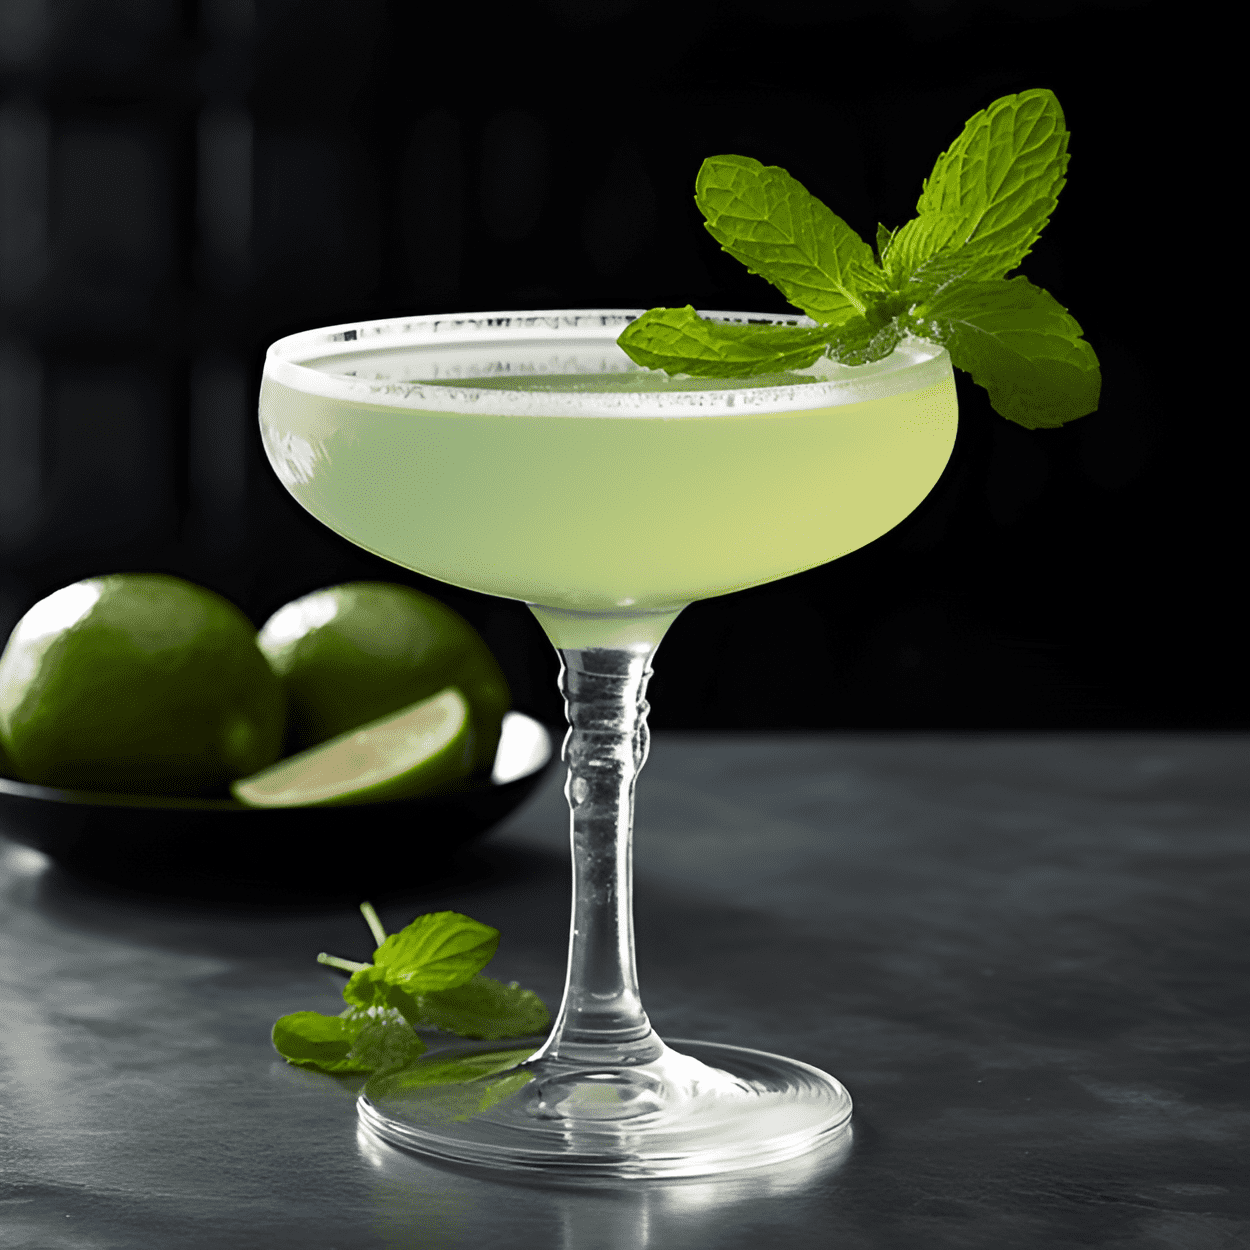 Southside Cocktail Recipe - The Southside cocktail is a harmonious blend of sweet, sour, and botanical flavors. The gin provides a strong, juniper-forward base, while the fresh lime juice adds a tangy, citrusy punch. The simple syrup balances out the tartness with a subtle sweetness, and the mint leaves give it a refreshing, herbal finish.